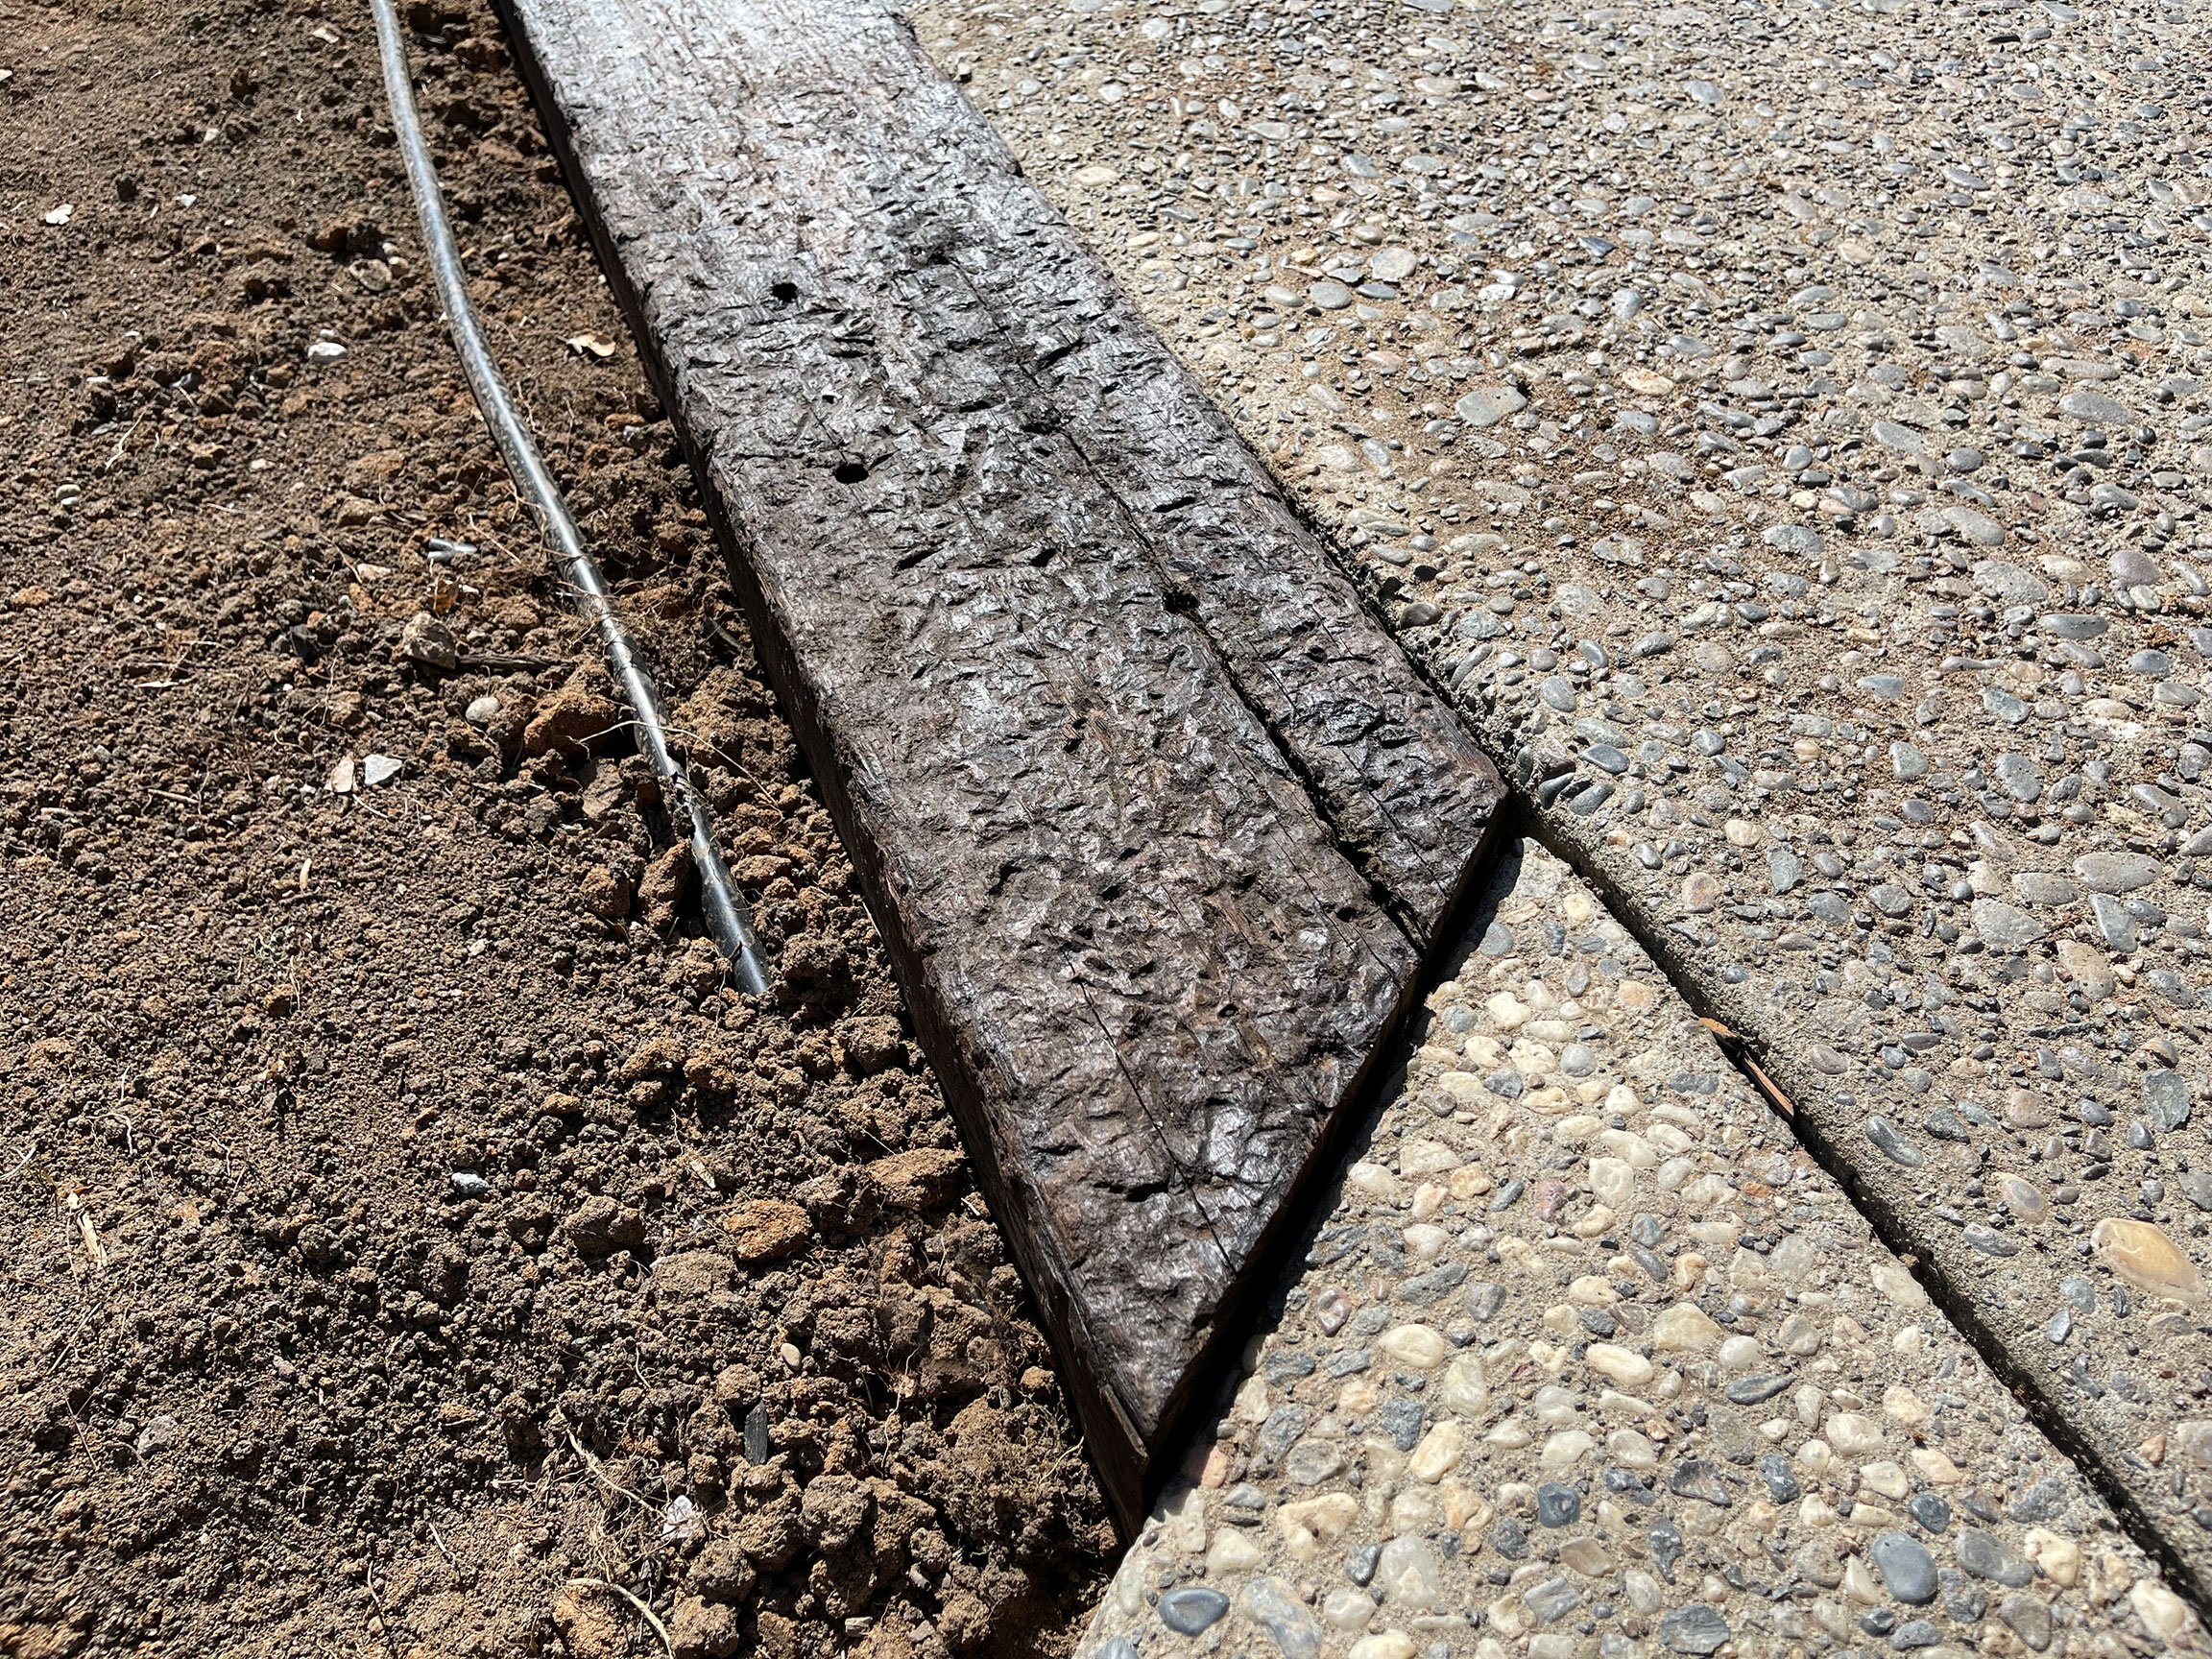  Precise angle cuts are made with a reciprocating saw to align with existing exposed aggregate walkways. 